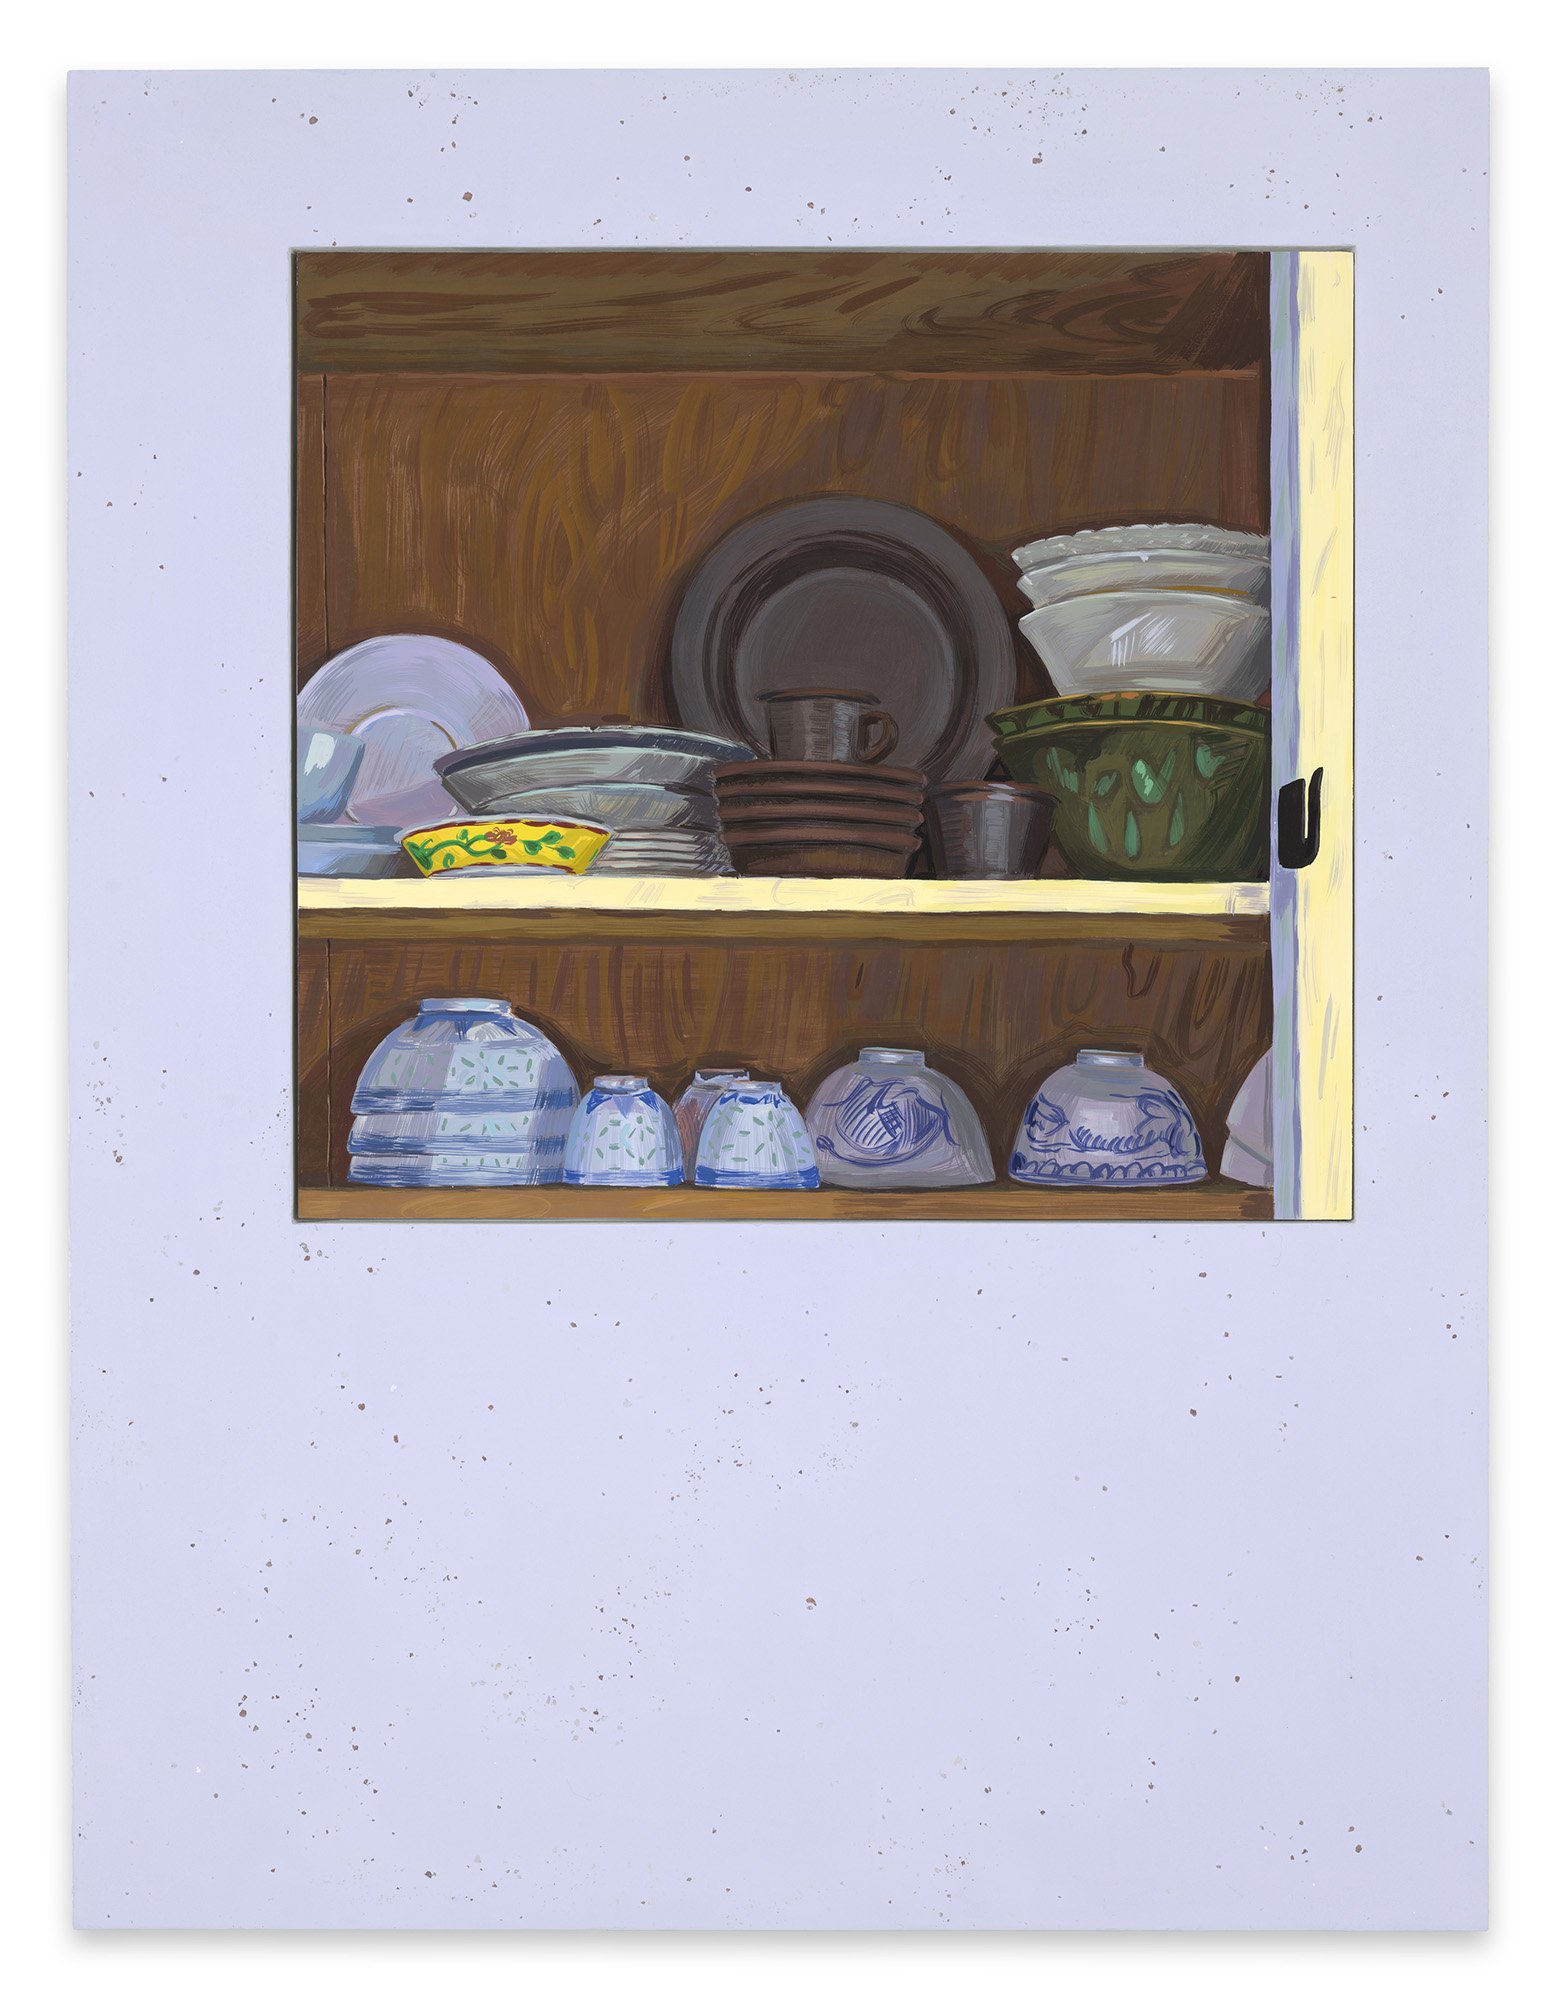 O'Keeffe's Dishes, 2019-20